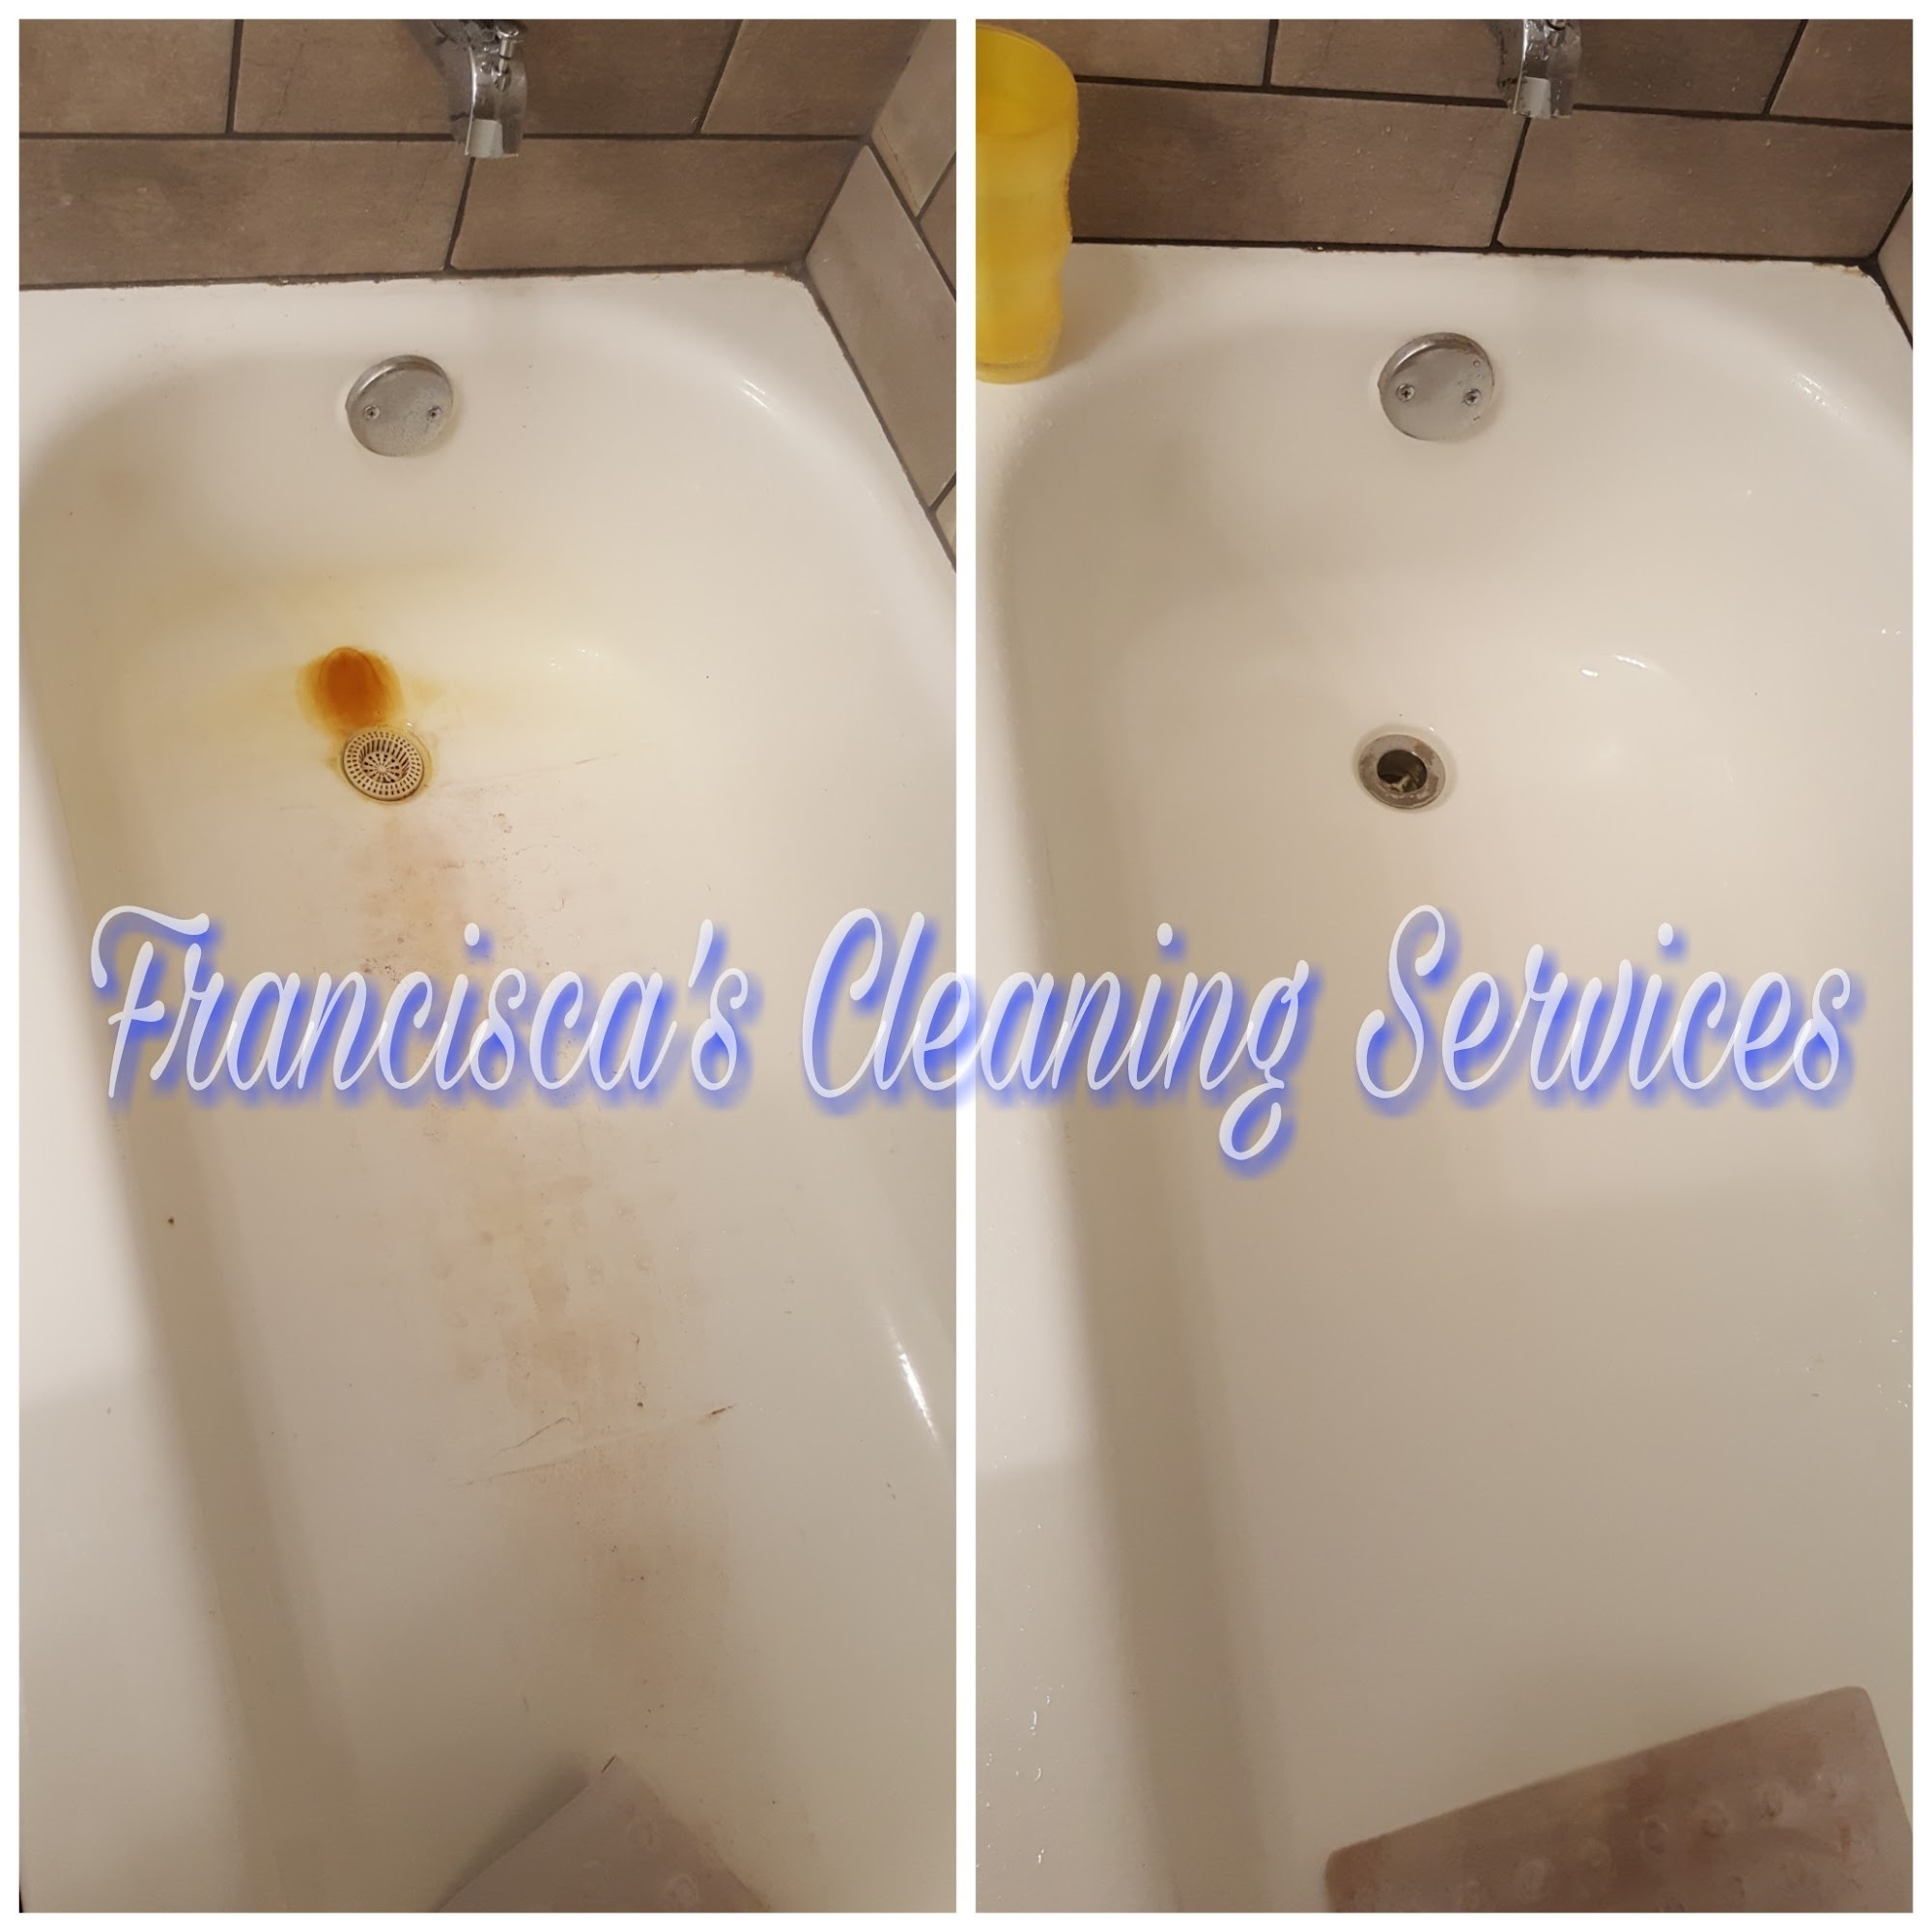 Francisca's Cleaning Services